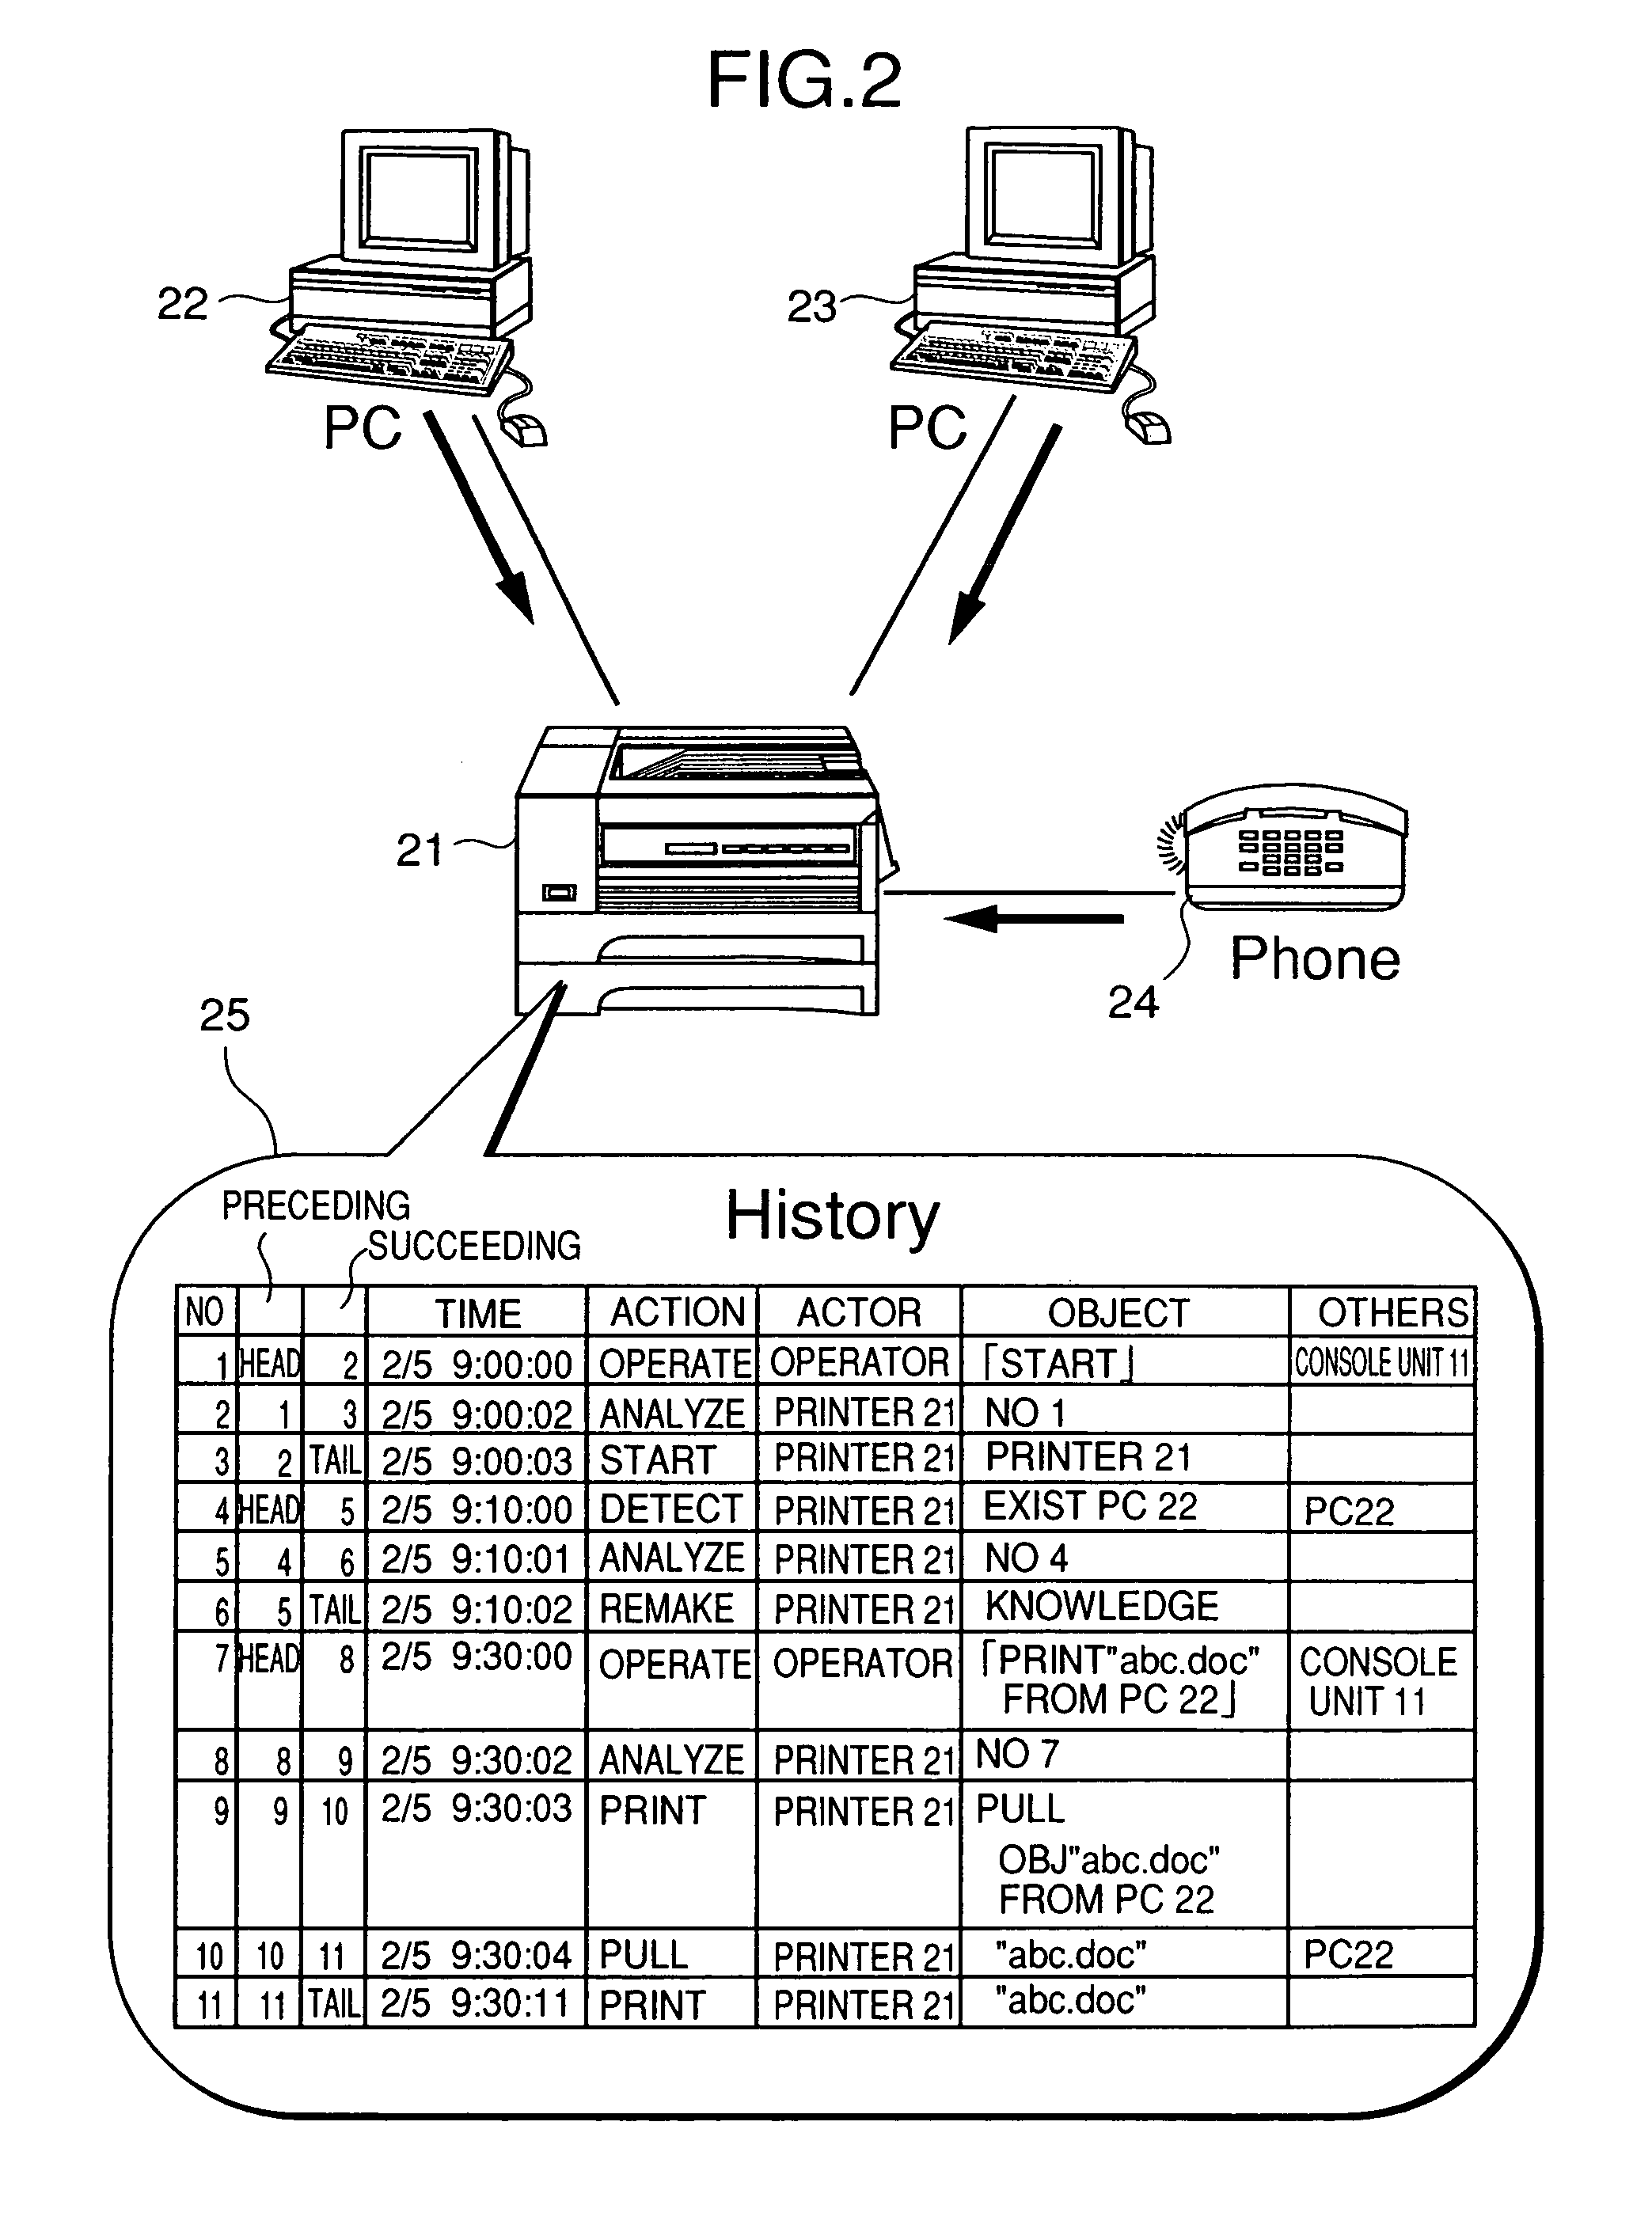 Notification apparatus and method therefor